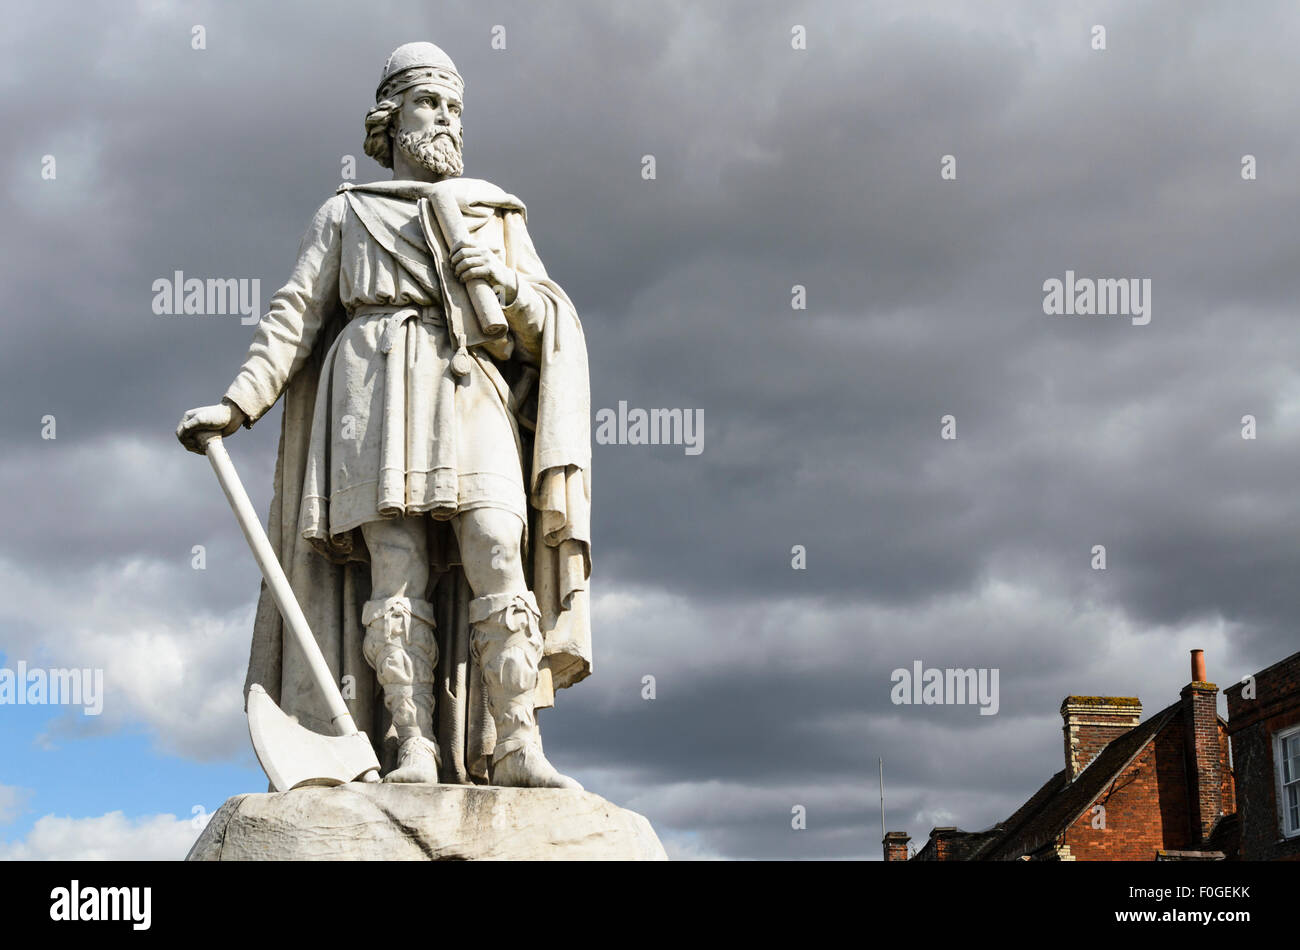 The Statue of King Alfred the Great in the Market Place, Wantage, Oxfordshire, England, UK. Stock Photo